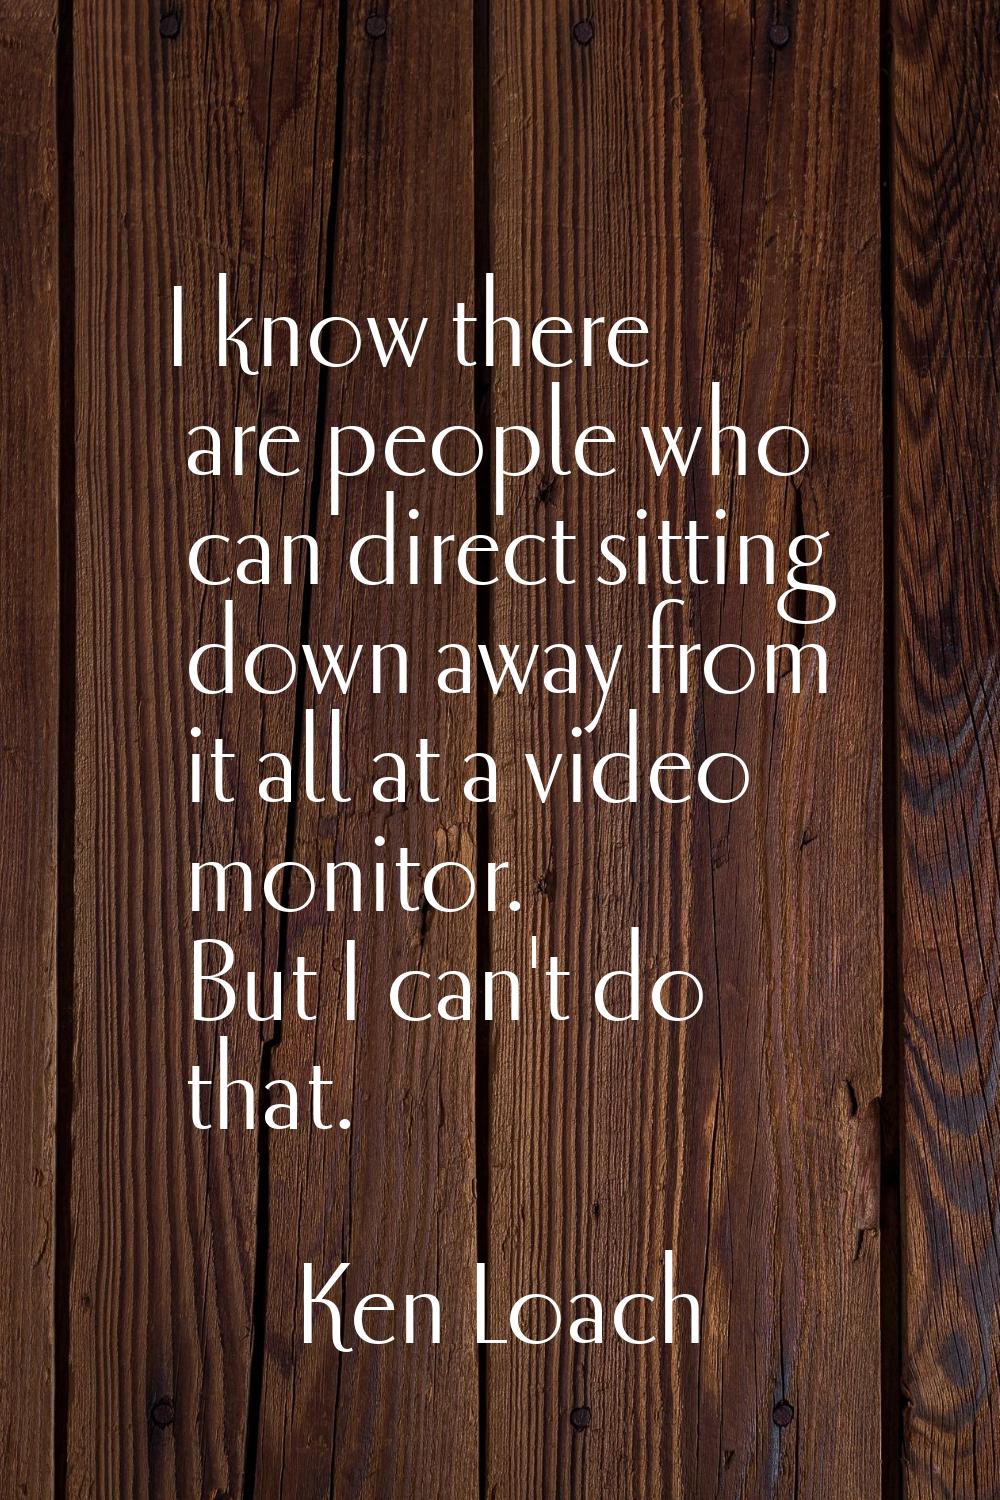 I know there are people who can direct sitting down away from it all at a video monitor. But I can'